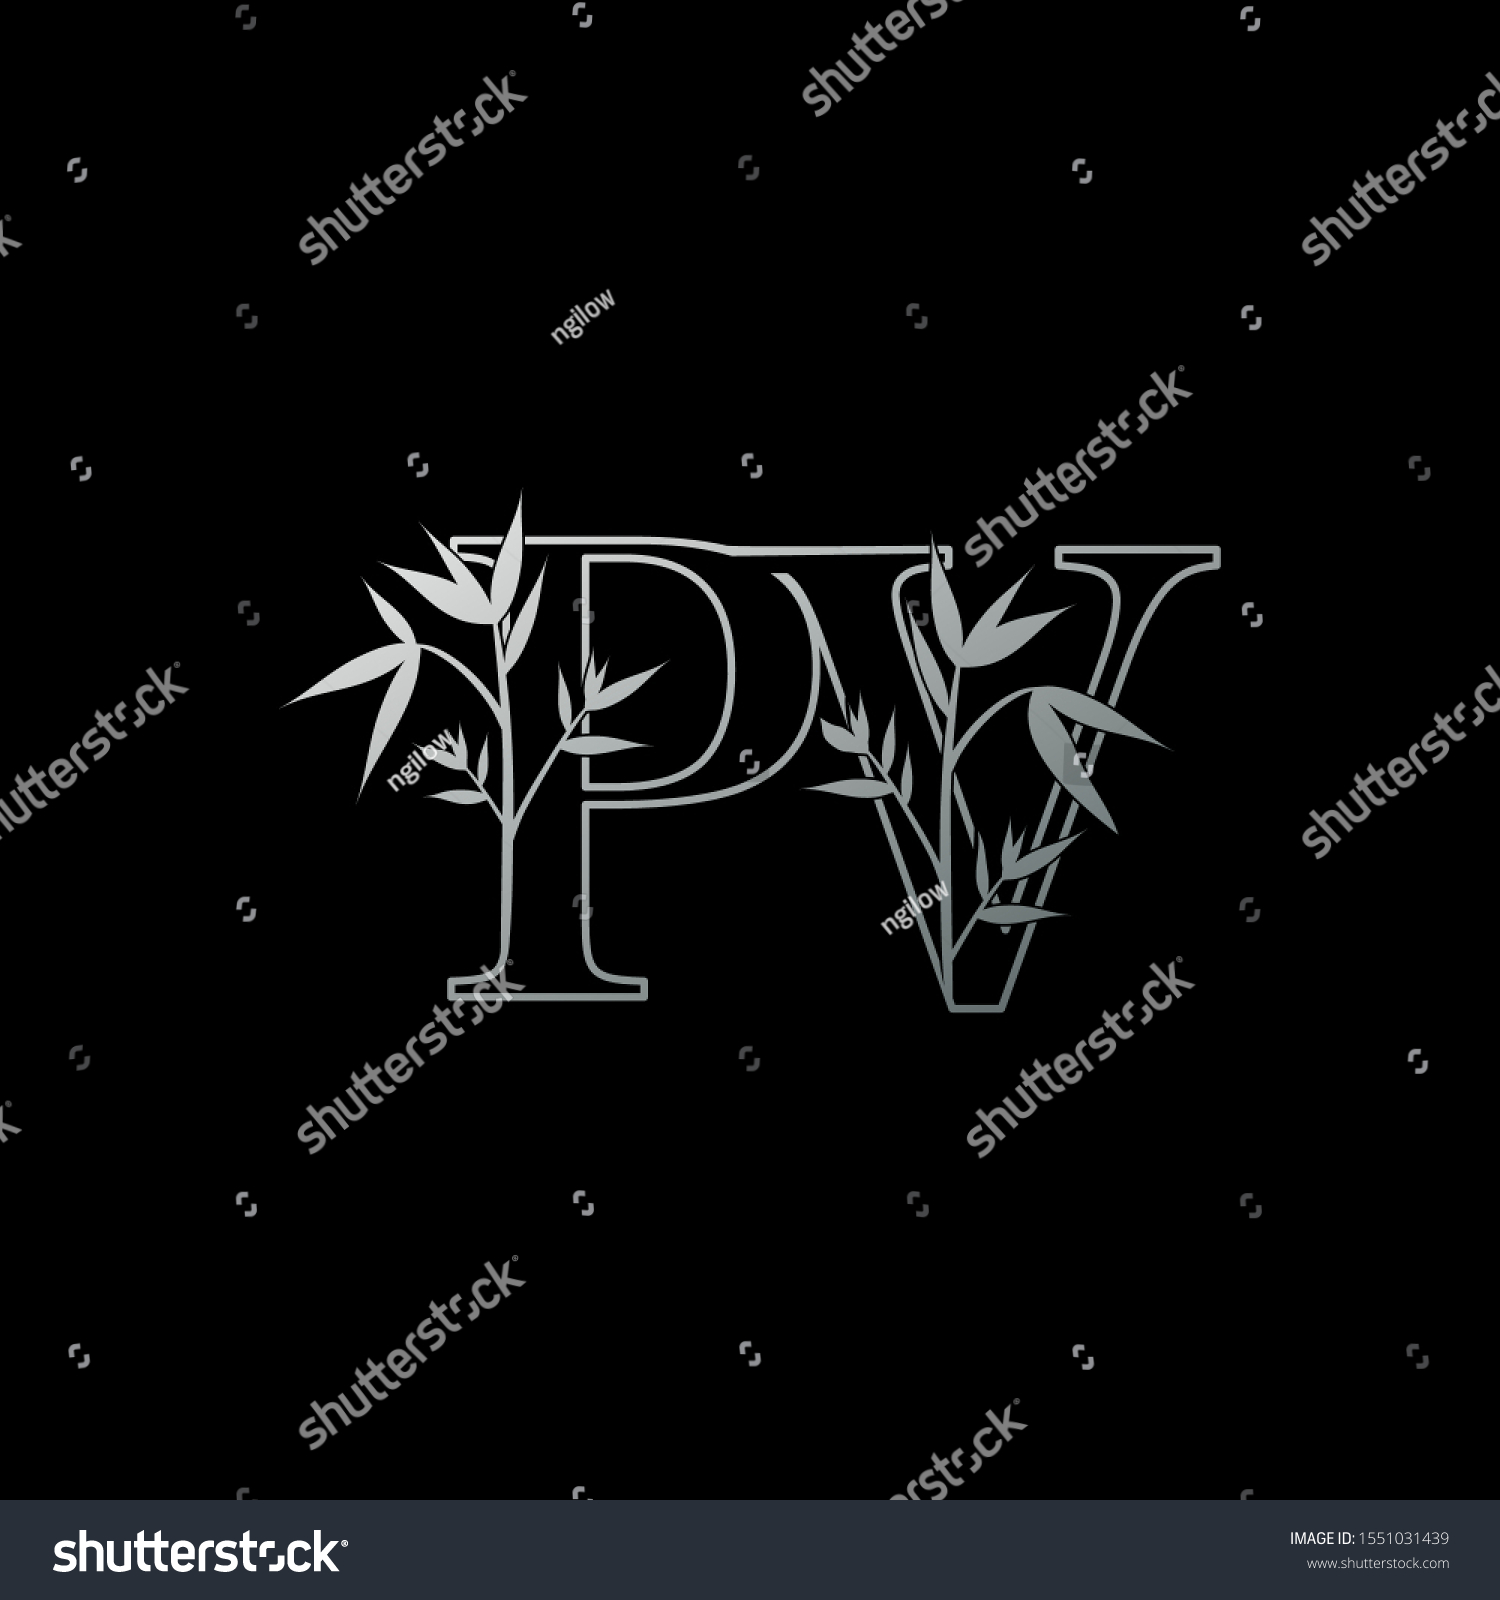 Silver Letter P V Pv Floral Stock Vector Royalty Free